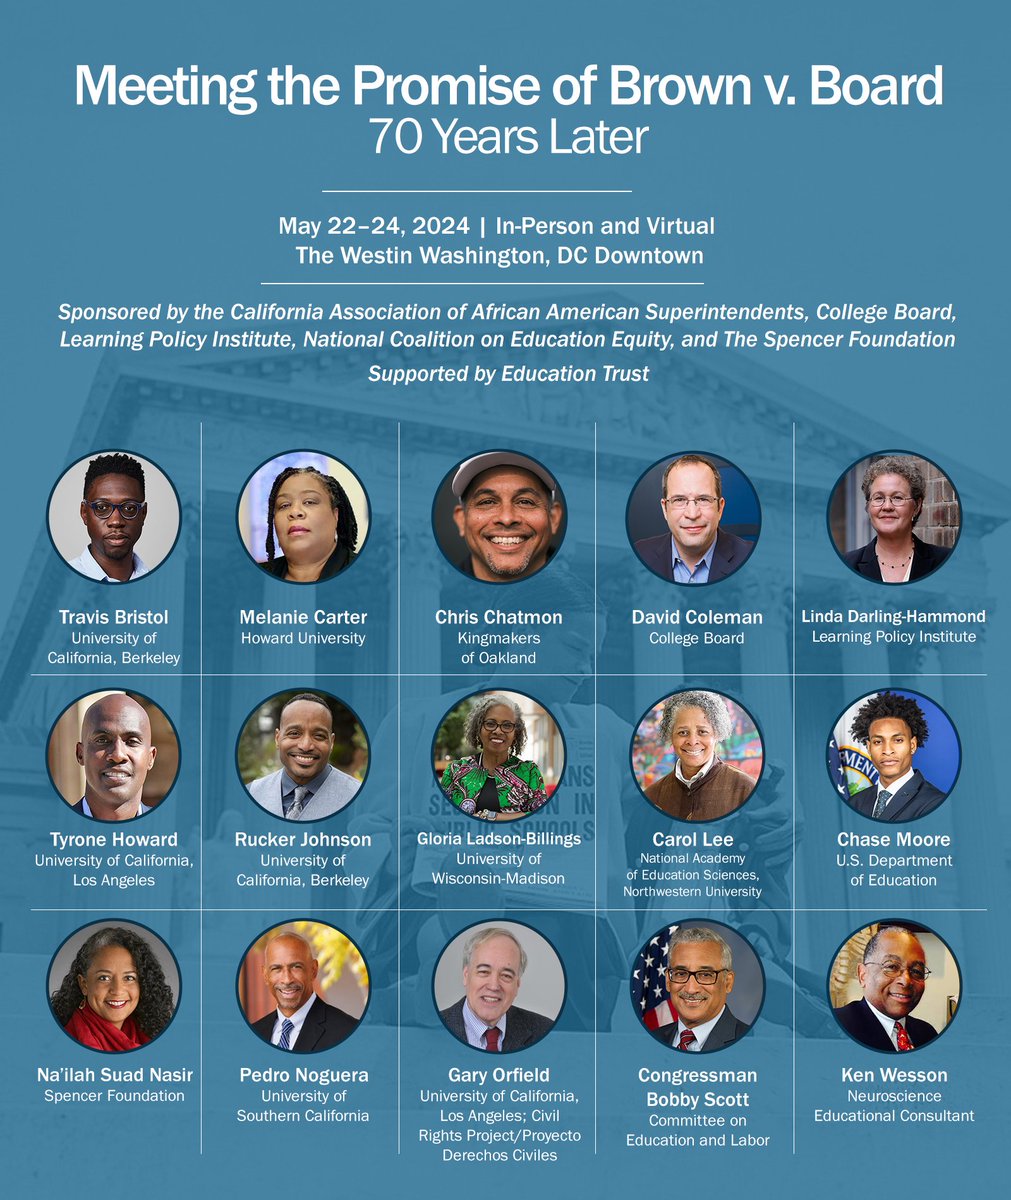 May 22–24 | Leading education researchers, civil rights advocates, legislators, and community leaders will convene for interactive sessions on what we have learned in the 70 years since the Brown v. Board decision and where we go from here. #BrownAt70 learningpolicyinstitute.org/event/meeting-…